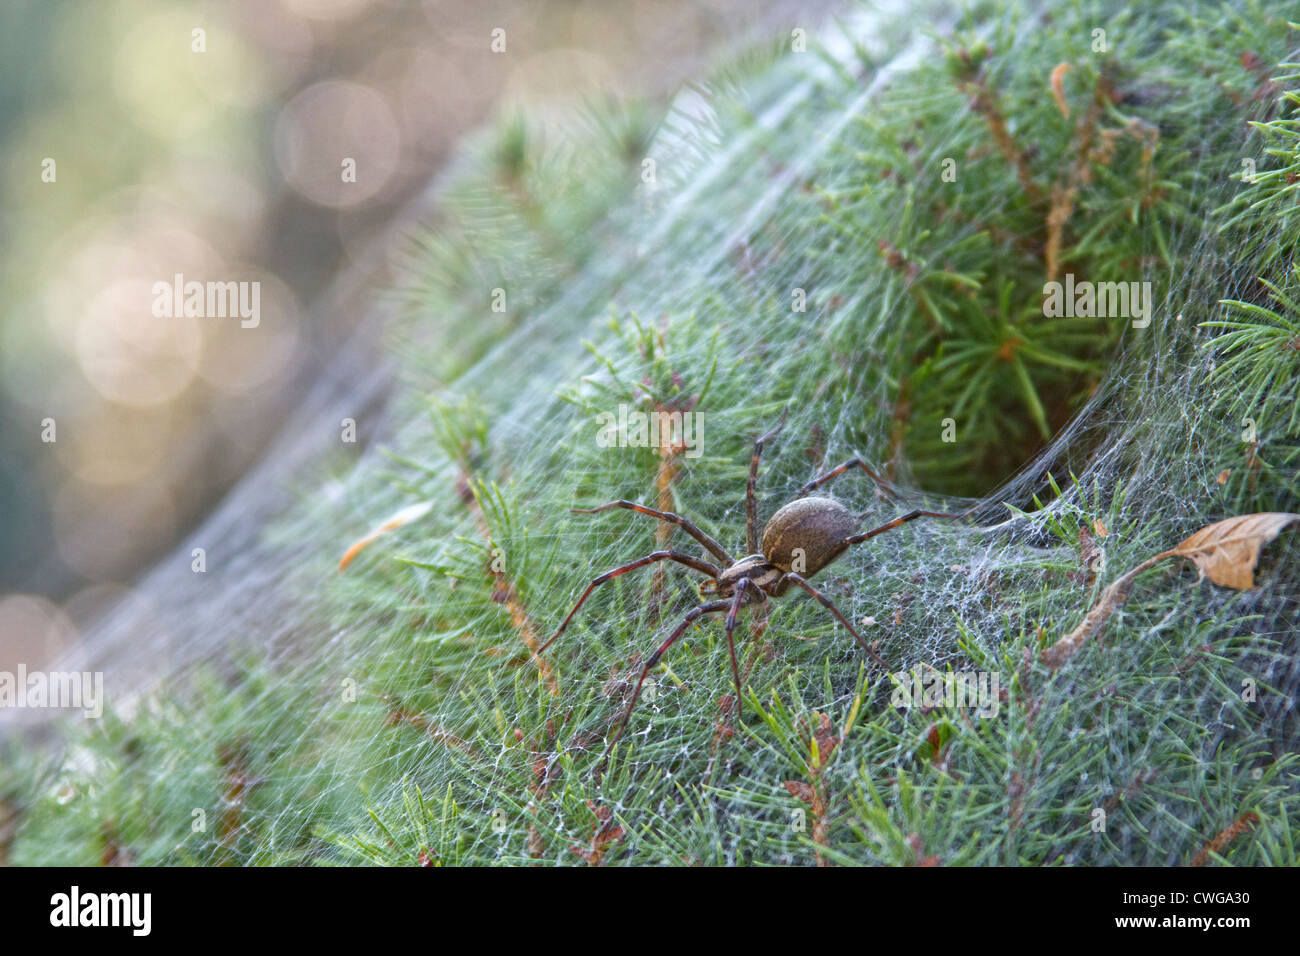 A funnel spider emerging from its funnel shaped web on an evergreen shrub Stock Photo